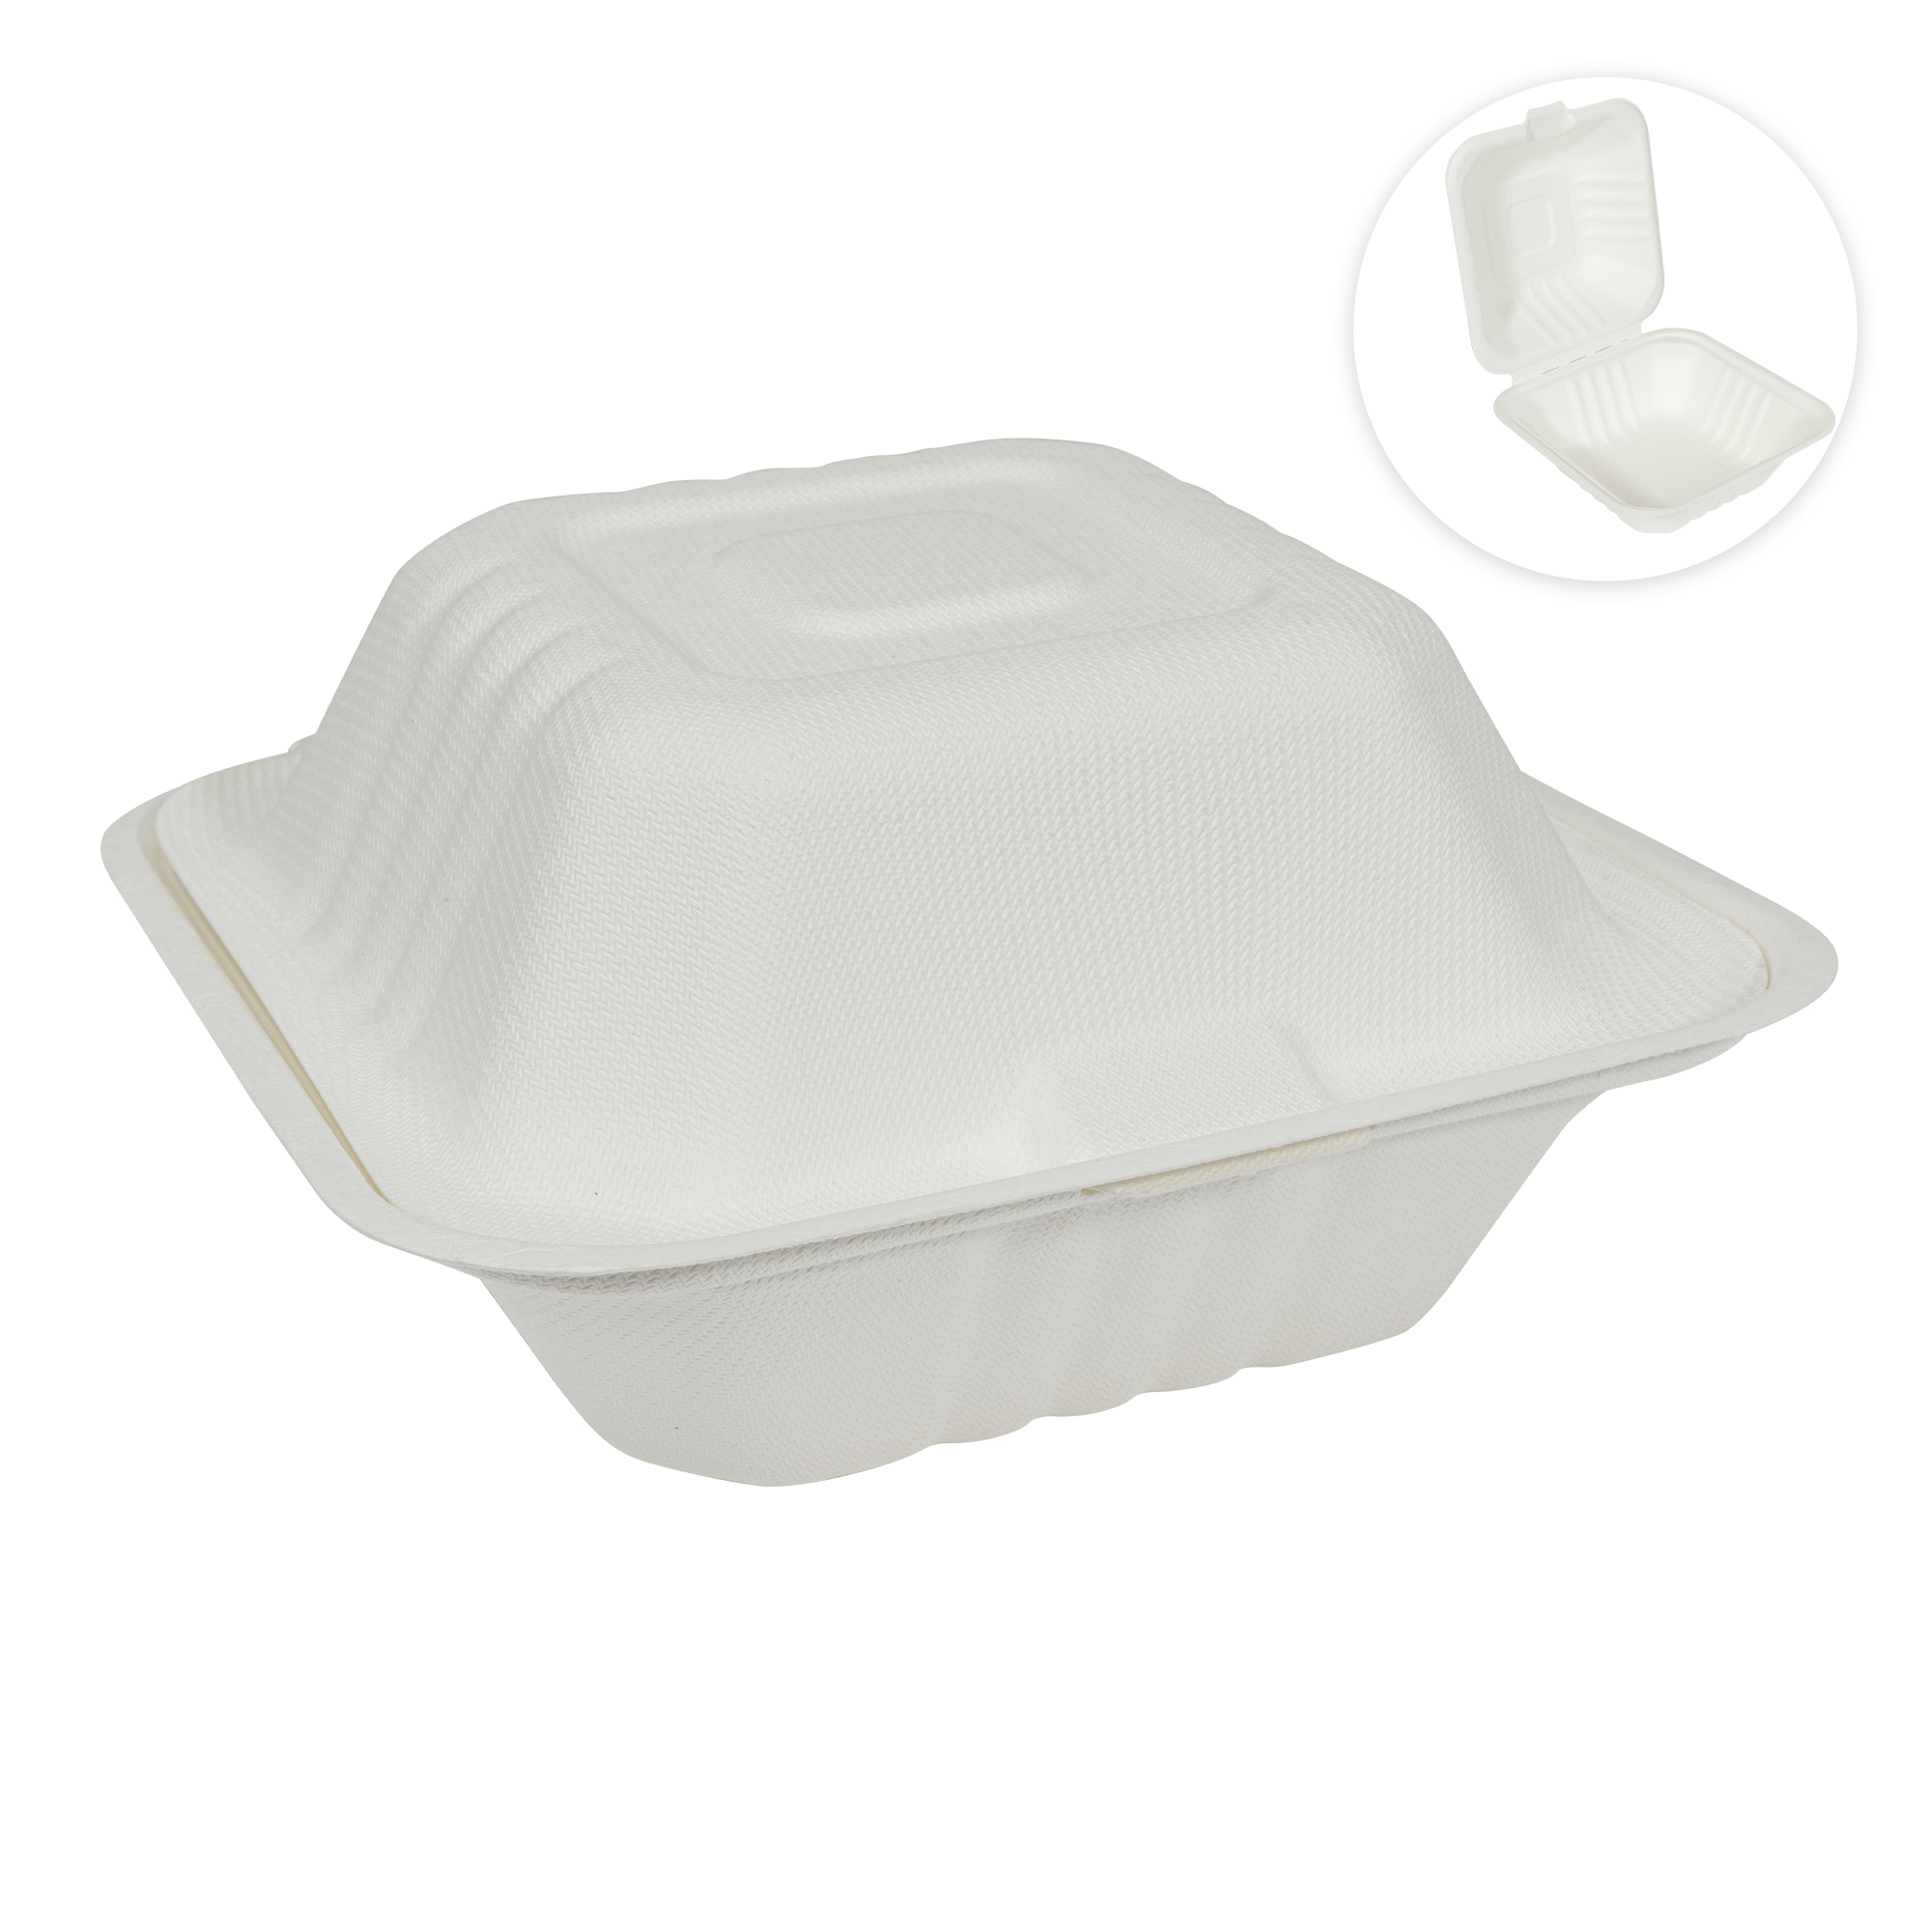 Square Compostable Fiber Hinged Container 6" 50pc/pack - White